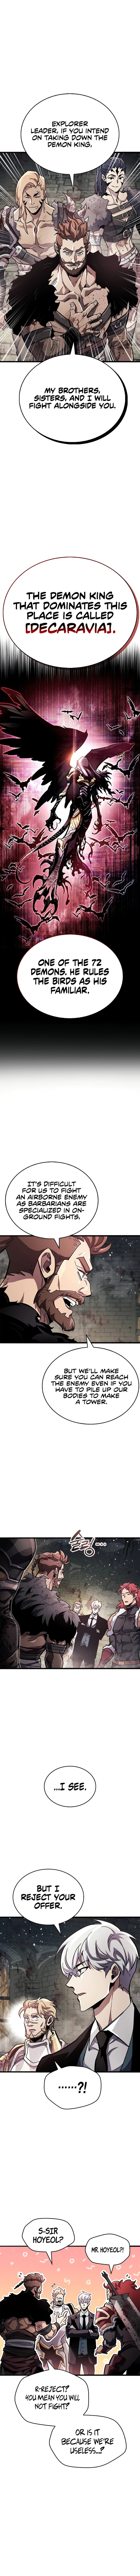 The Player Hides His Past - Chapter 46 Page 9